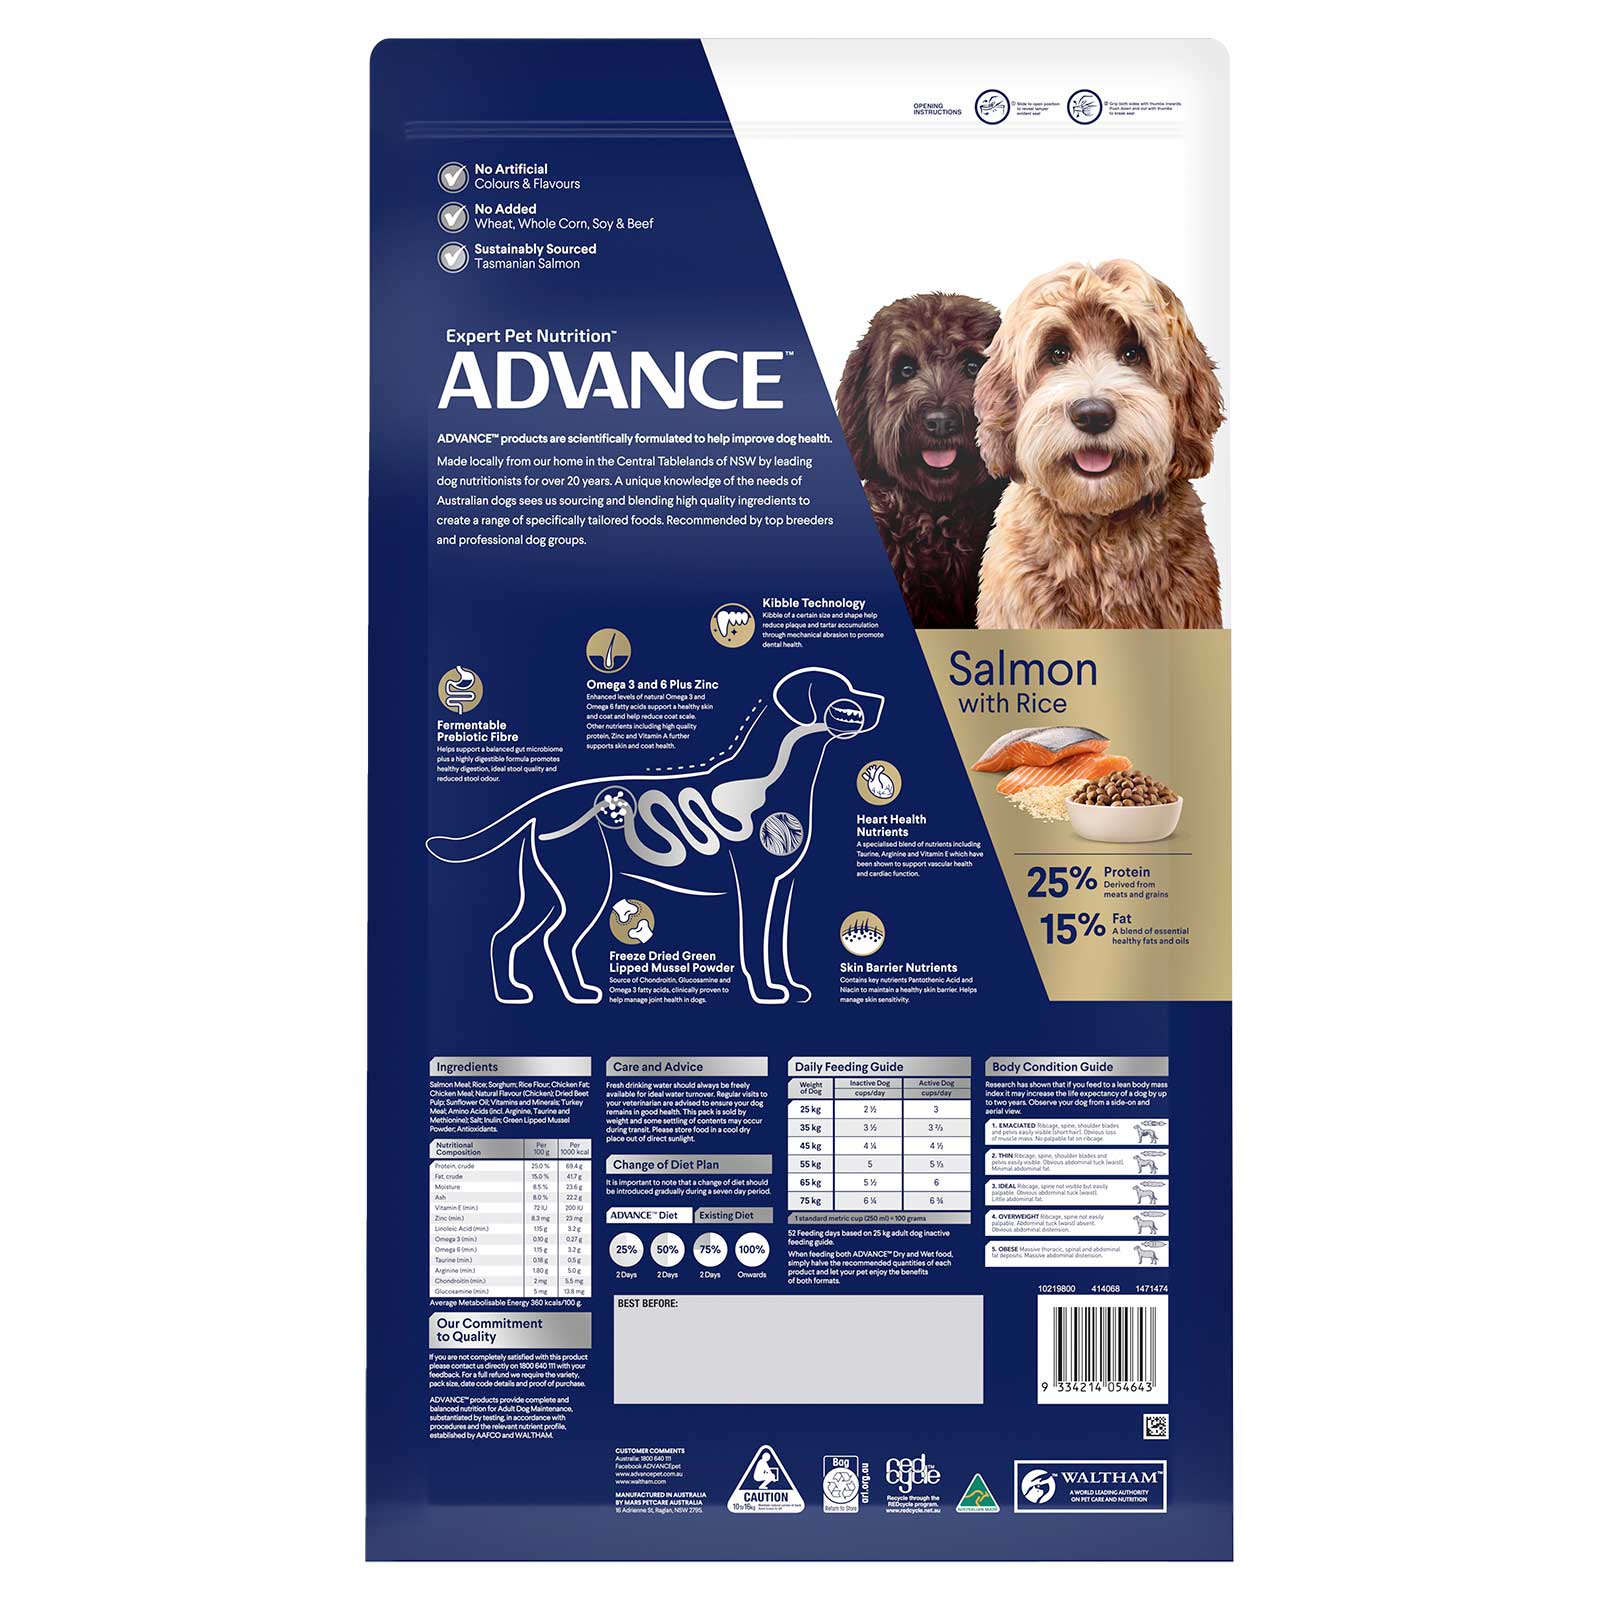 Advance Dog Food Adult Large Oodle Breed Salmon with Rice